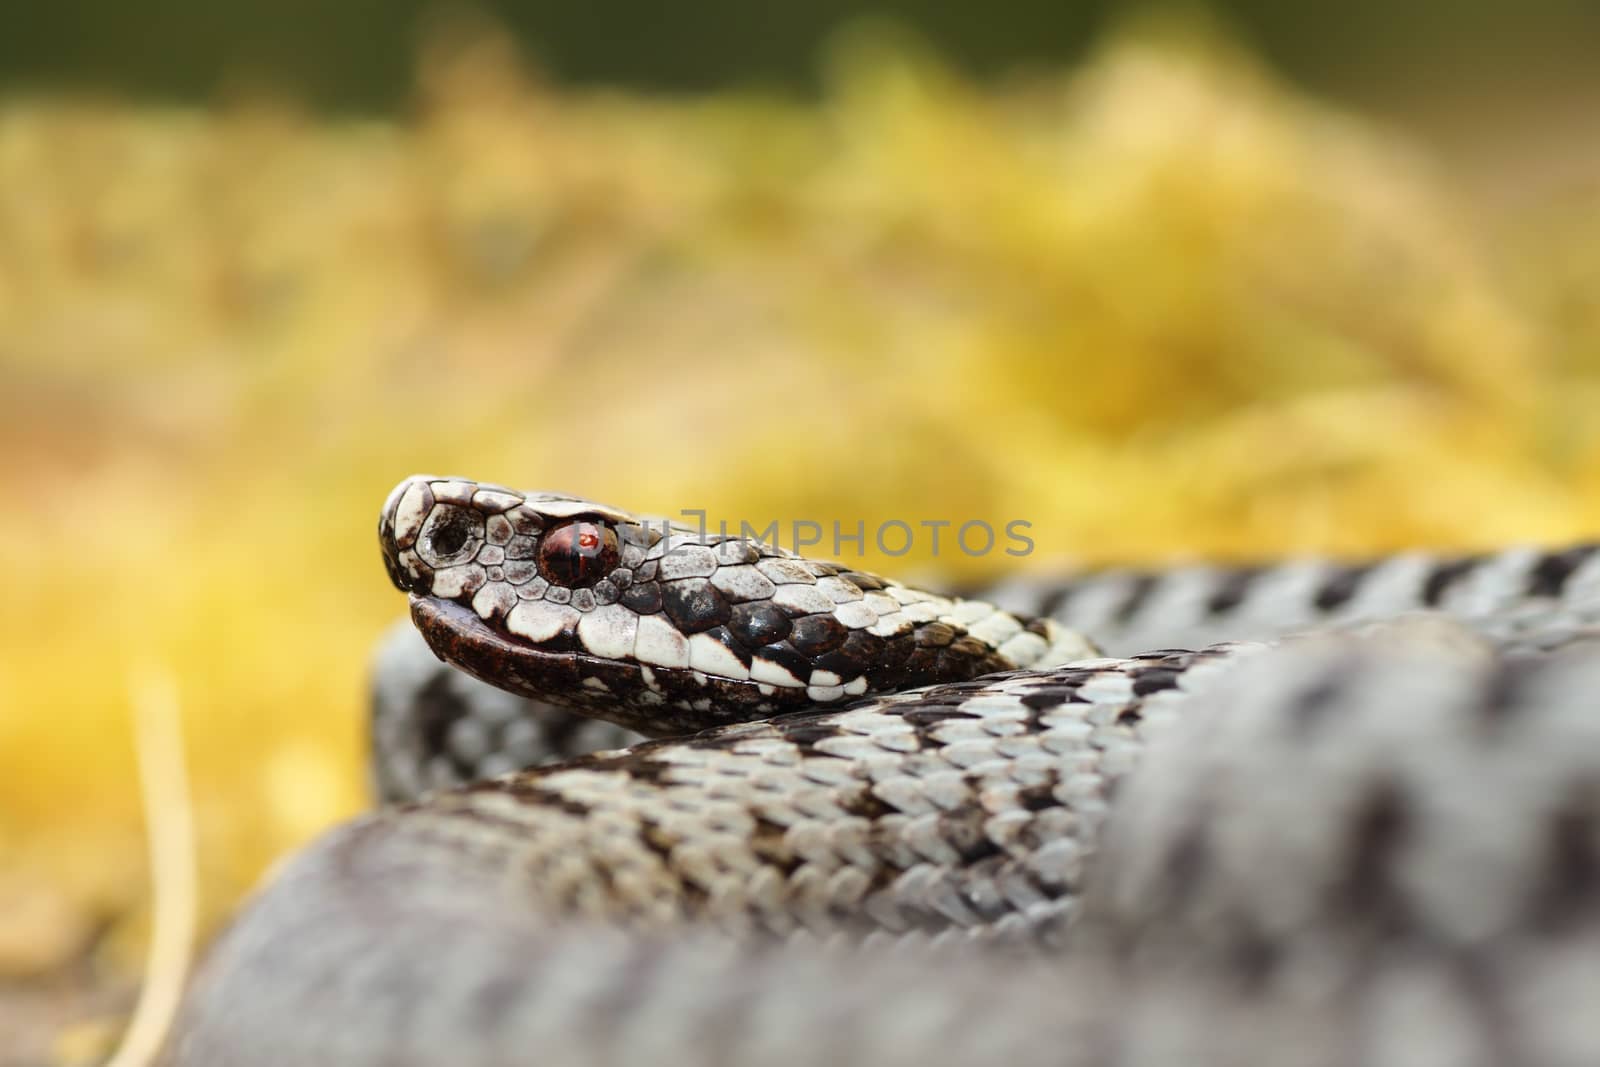 portrait of male Vipera berus, the mot common poisonous snake in Europe